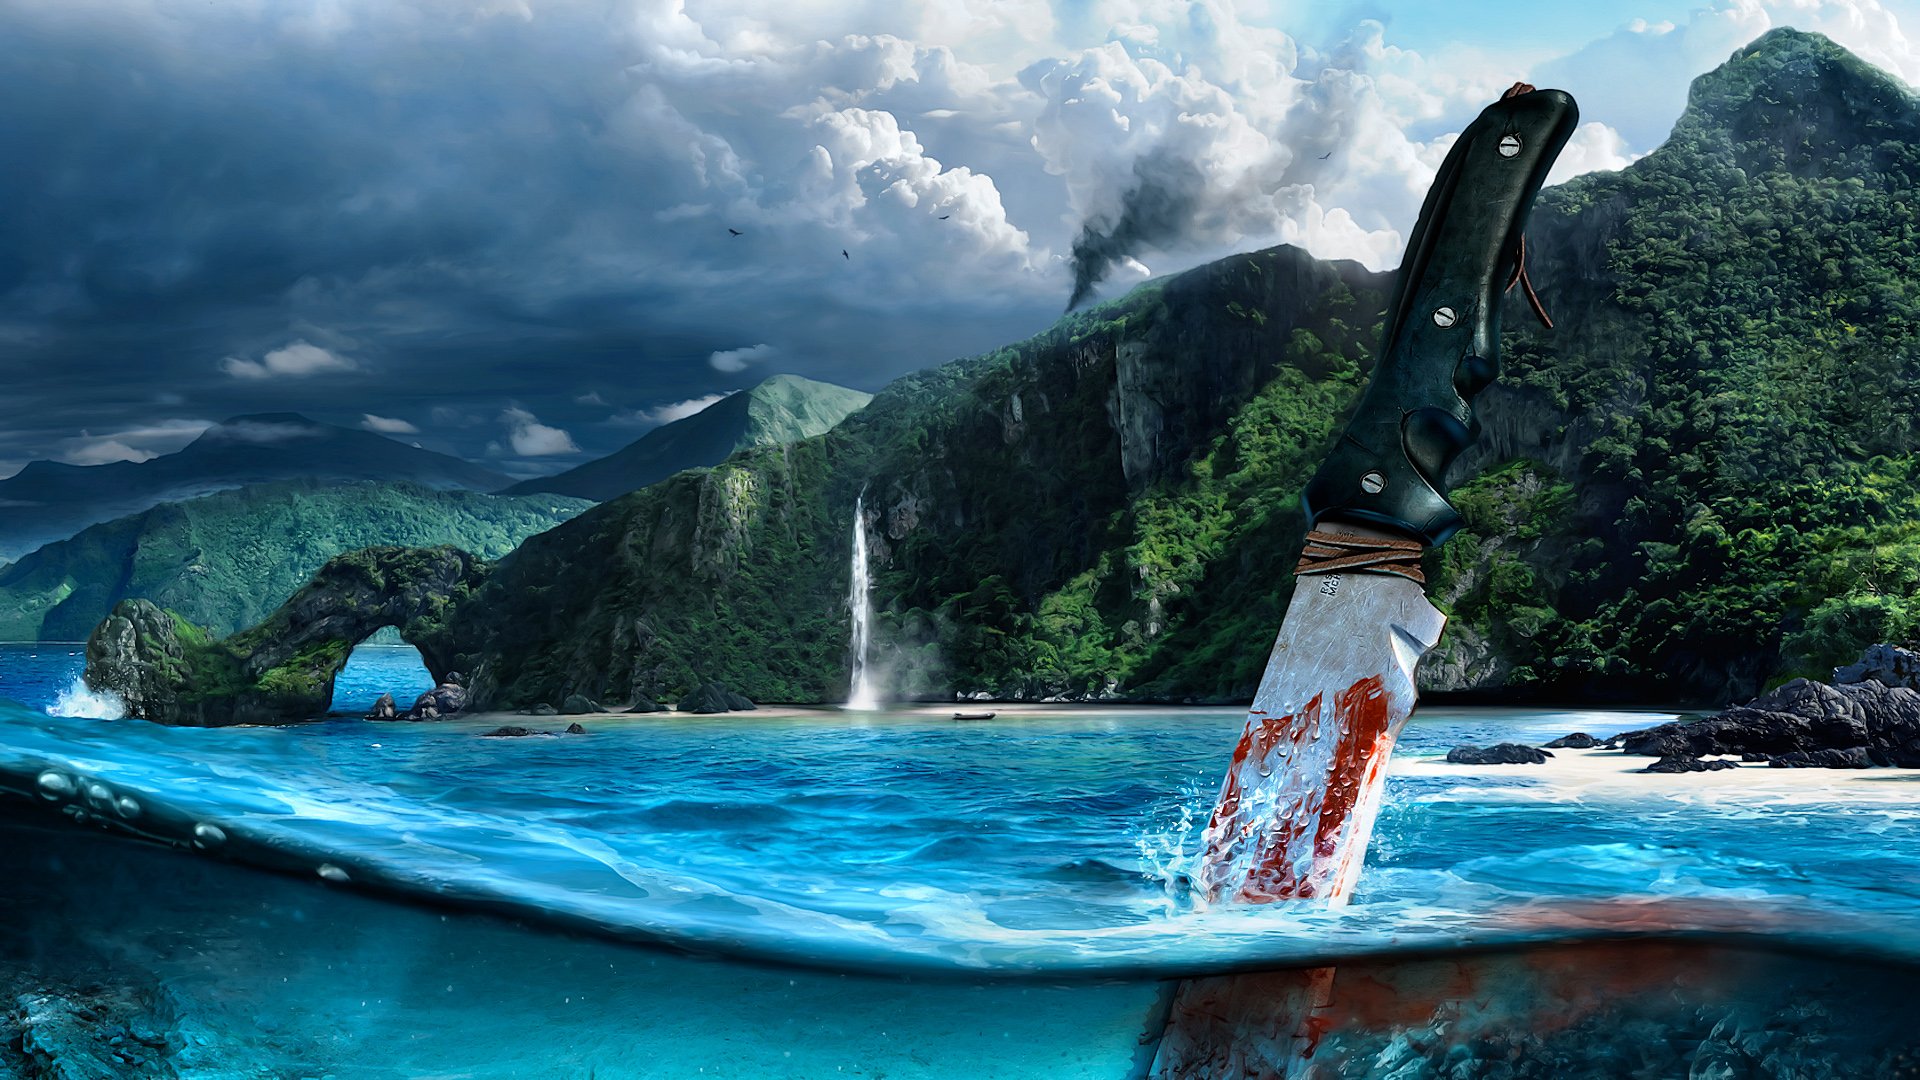 Far Cry 3 Wallpapers in HD Page 3 1920x1080